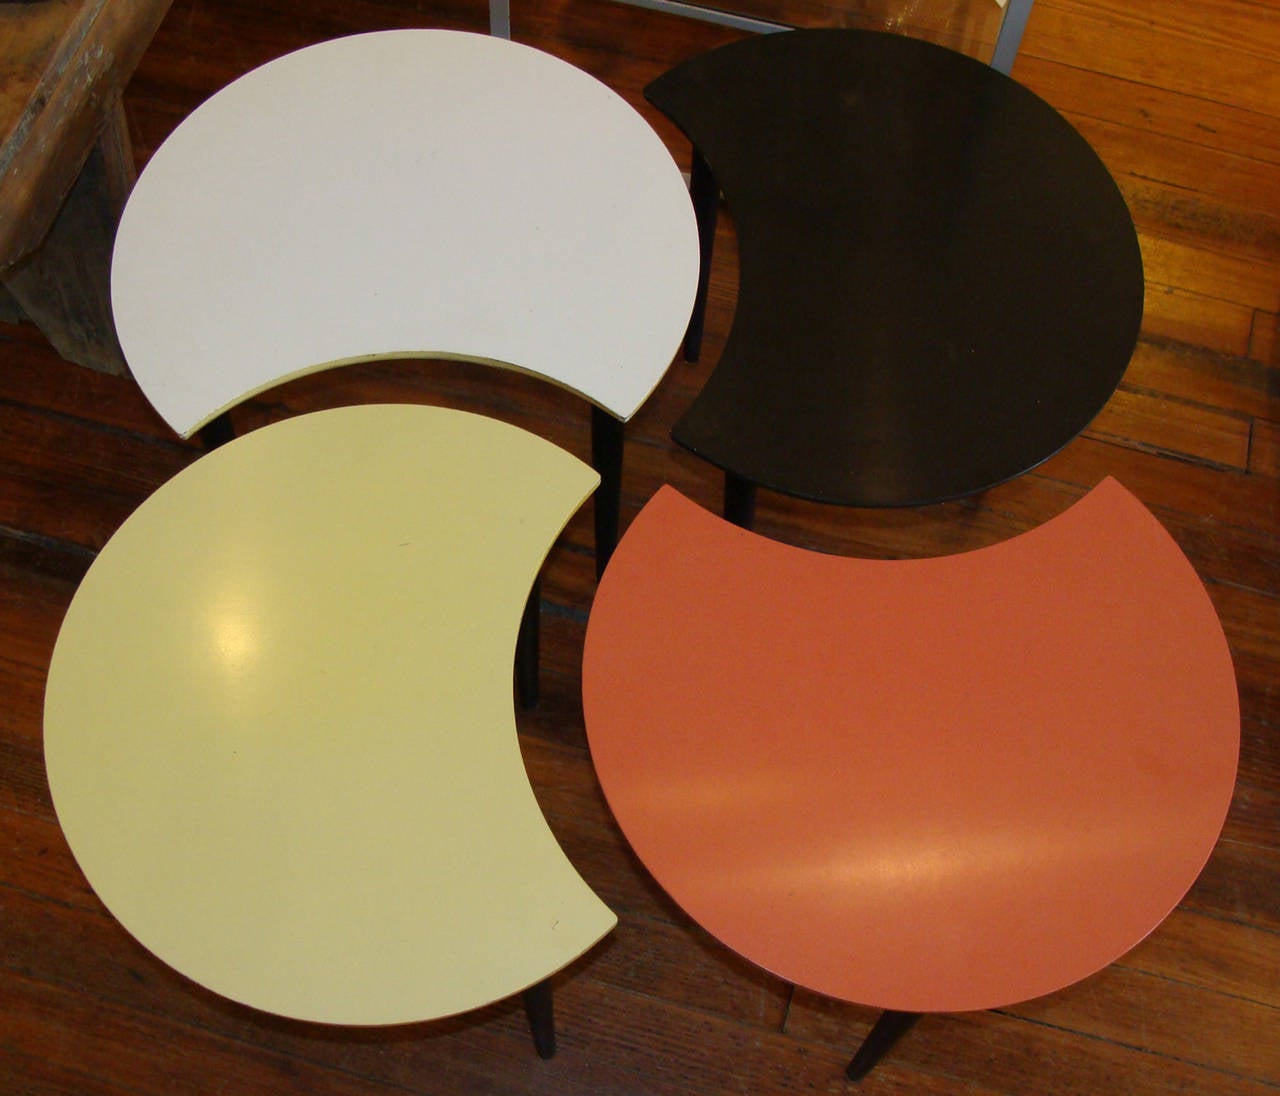 Set of four low tables which can be formed or separated in a variety of configurations.
One each in black, white, coral/orange, and yellow laminate on wood. All have black painted wood legs.
Legs can be easily unscrewed for transport/shipping.